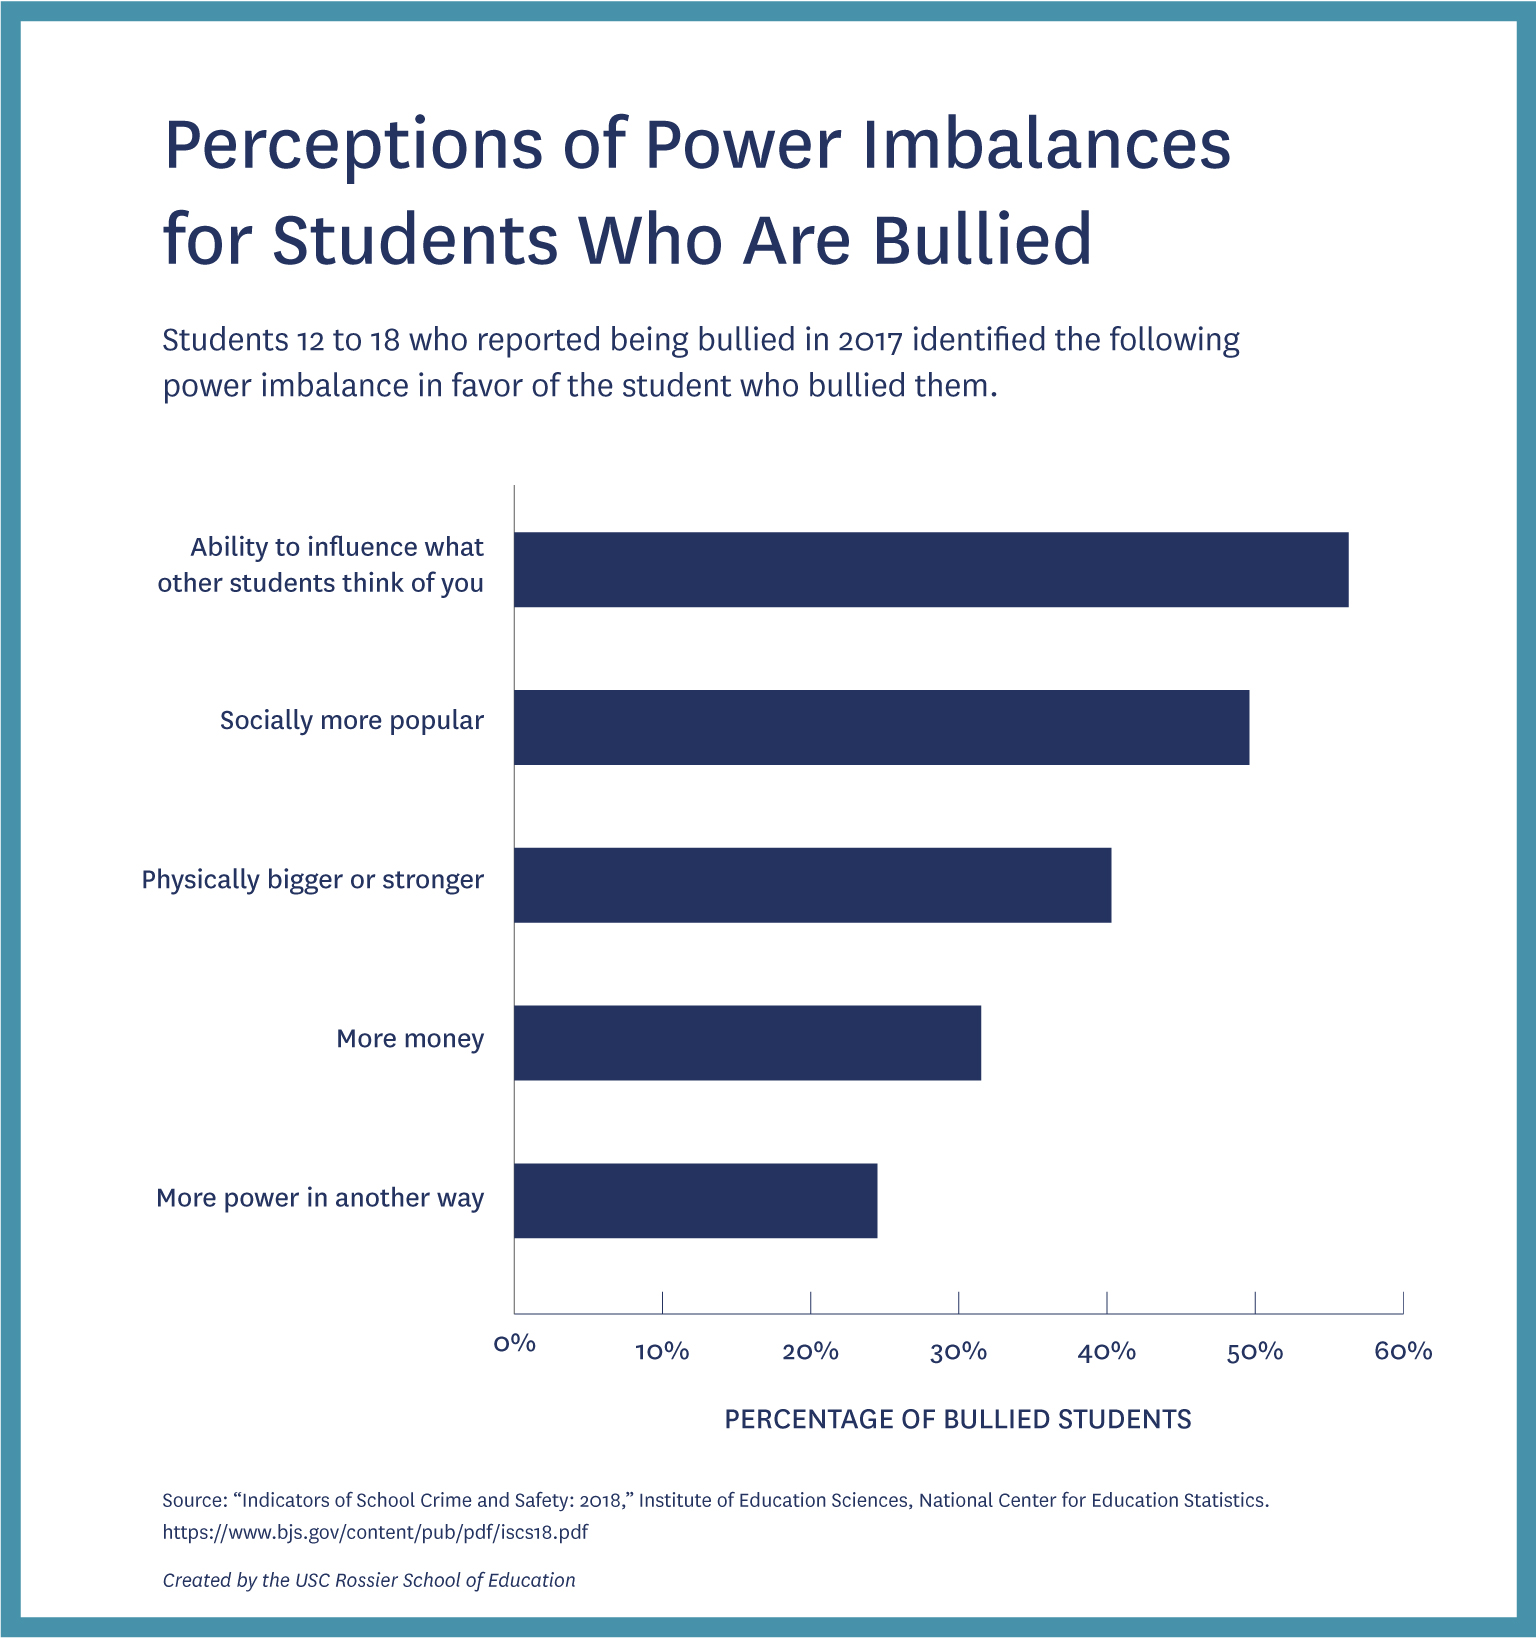 Bar graph showing the percentage of bullied students by perceived type of power imbalance.